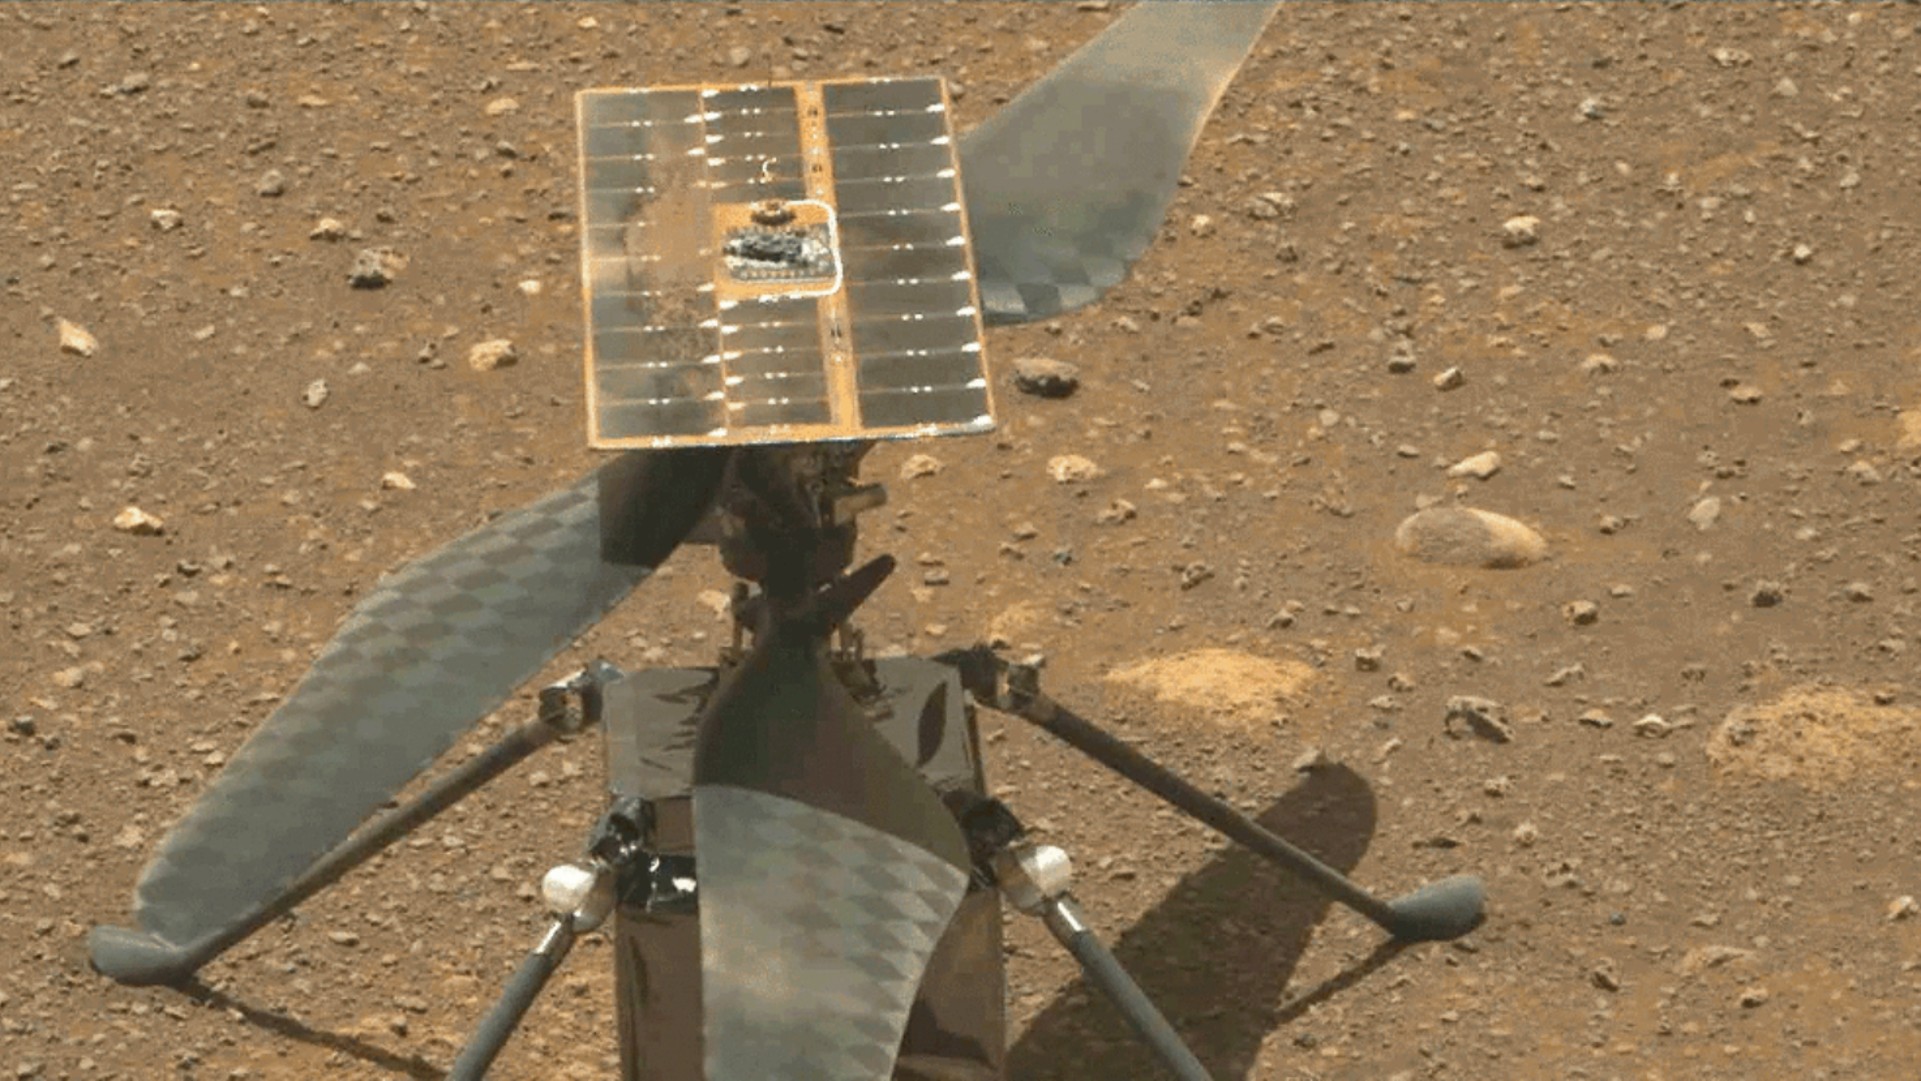 Unstoppable Martian Helicopter Creativity: Its Mission Continues

